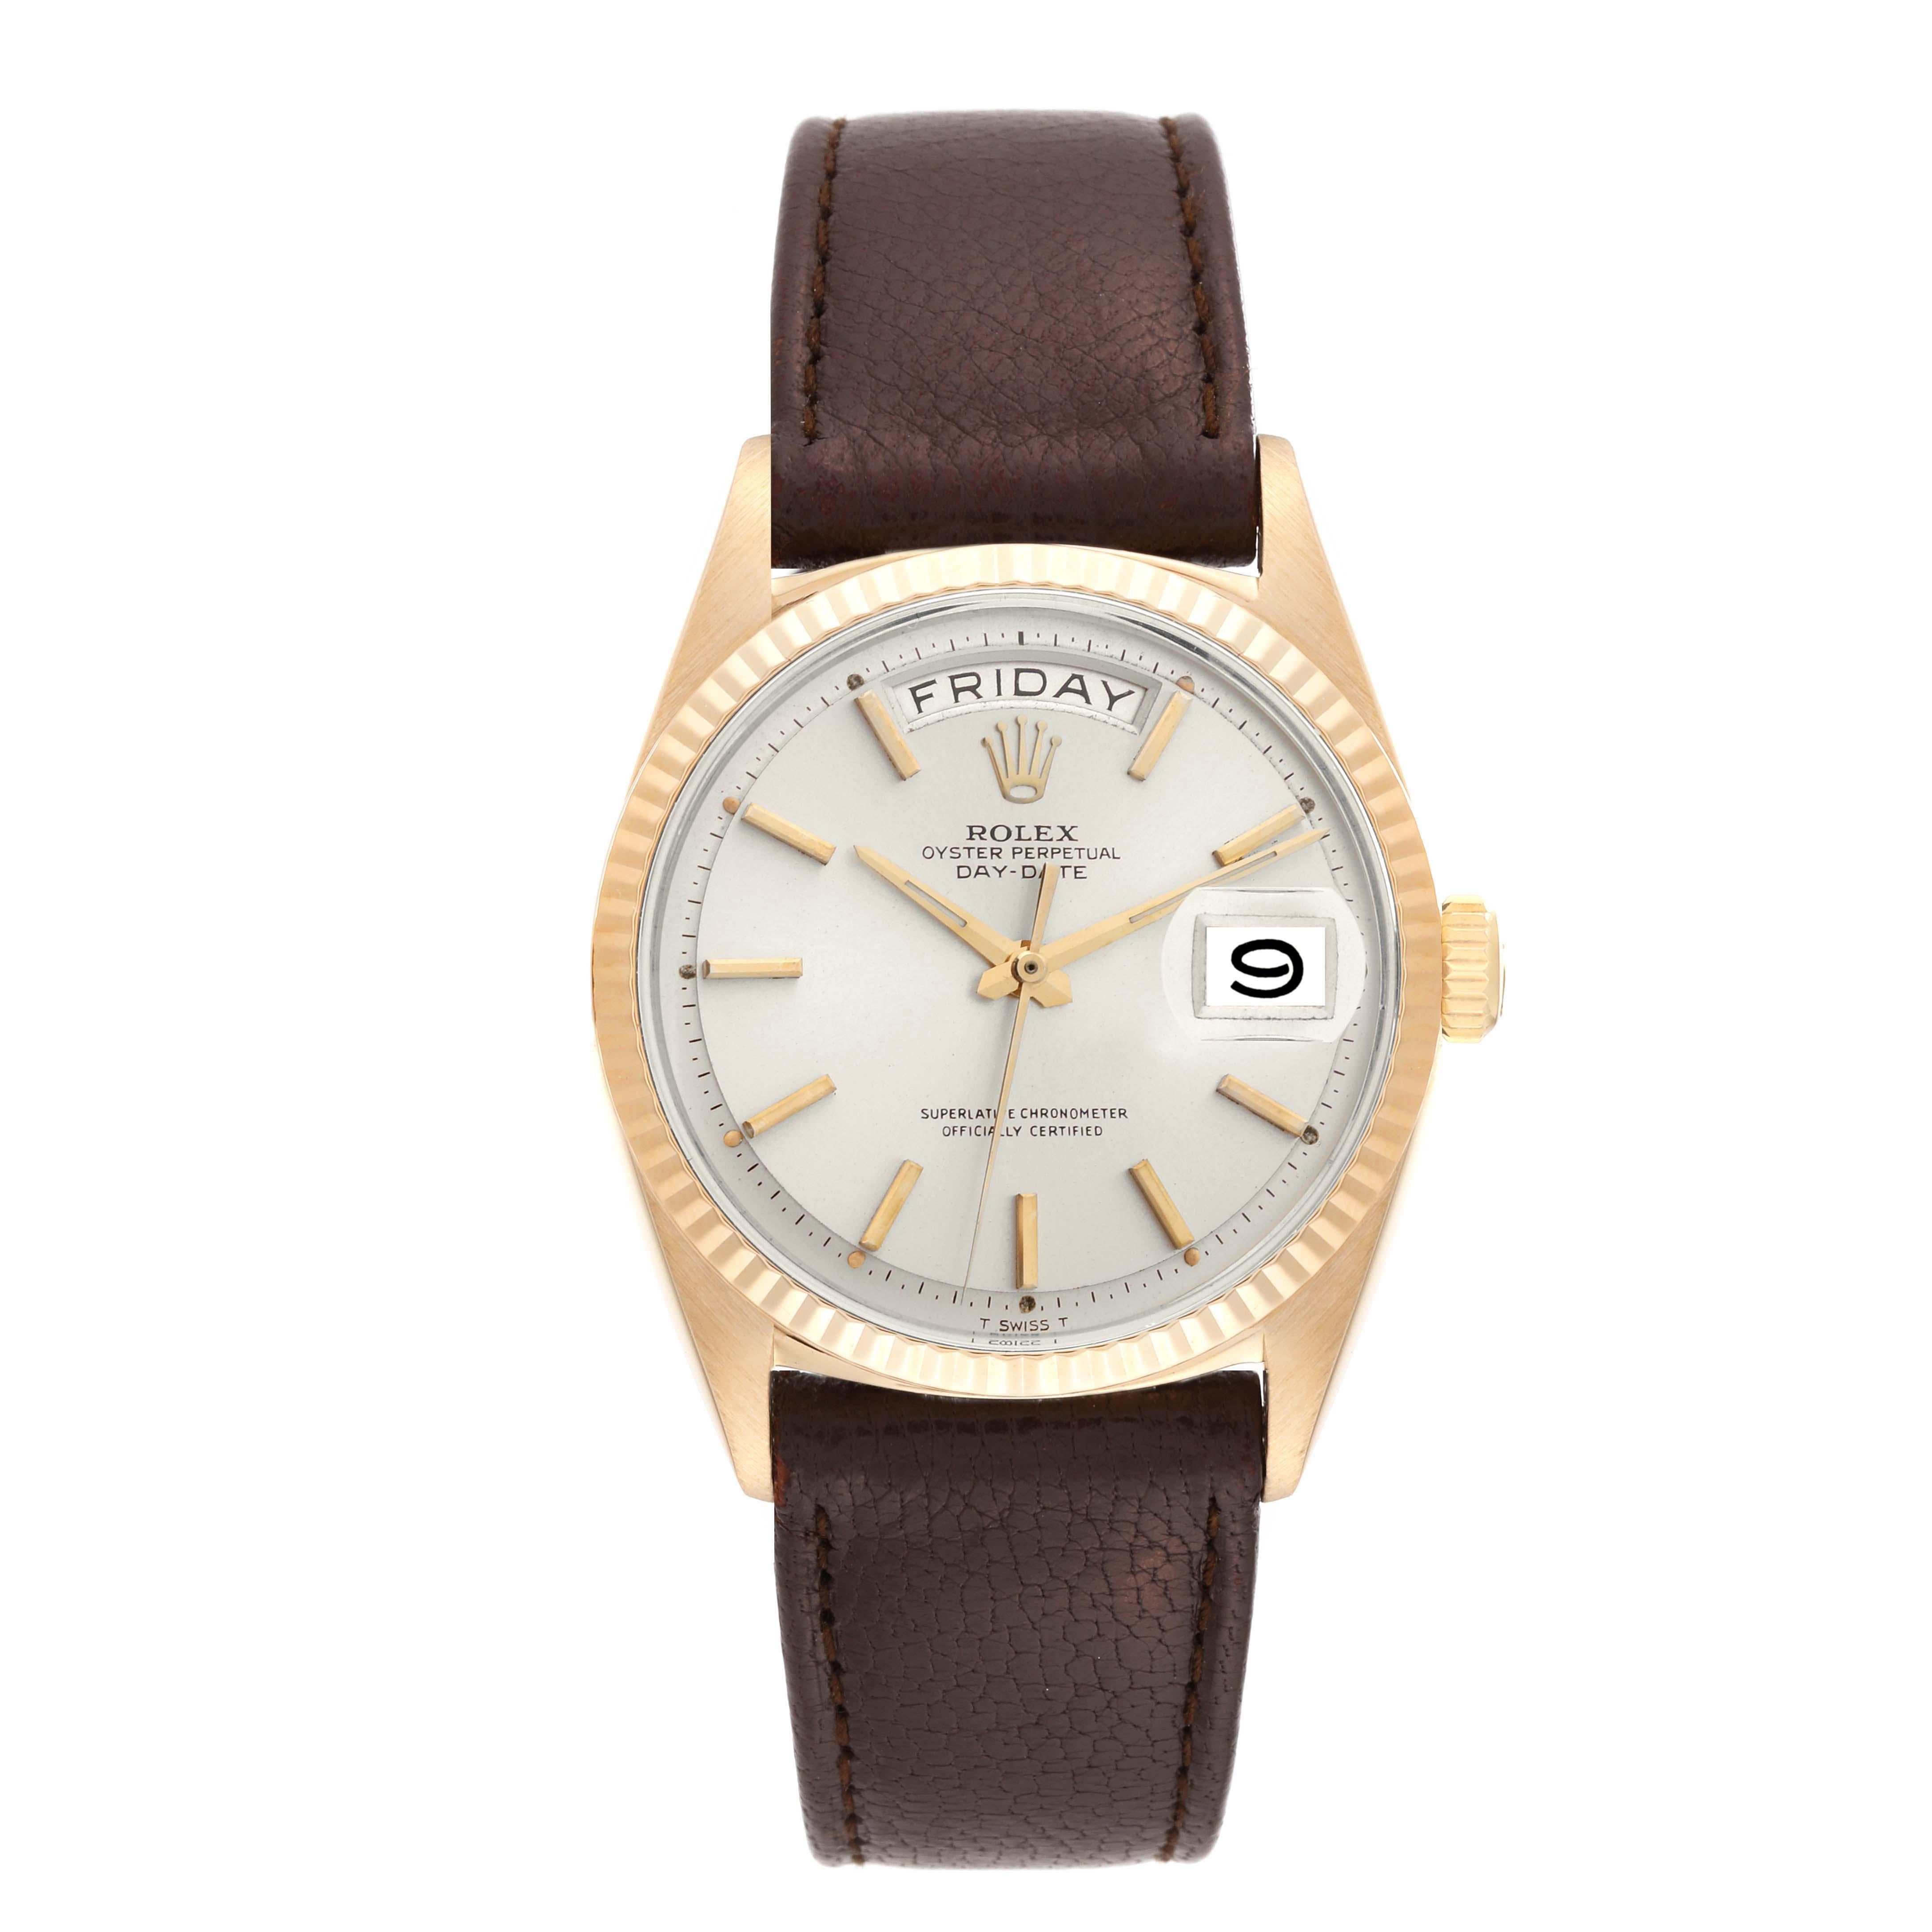 Rolex President Day-Date Silver Dial Yellow Gold Vintage Mens Watch 1803. Officially certified chronometer automatic self-winding movement. 18k yellow gold oyster case 36.0 mm in diameter.  Rolex logo on crown. 18k yellow gold fluted bezel. Acrylic